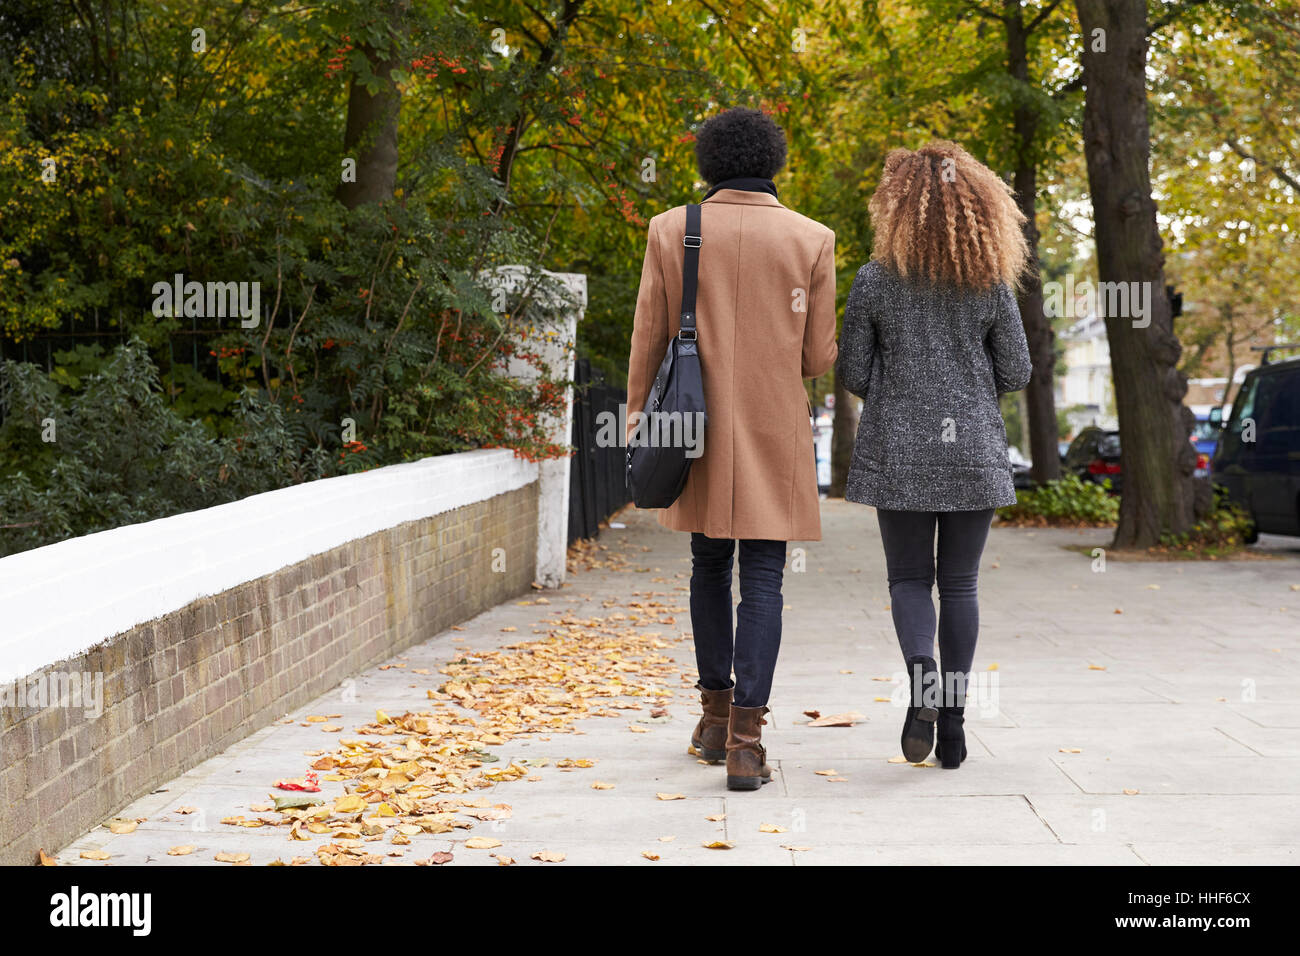 Rear View Of Stylish Couple Walking On Fall Street In City Stock Photo